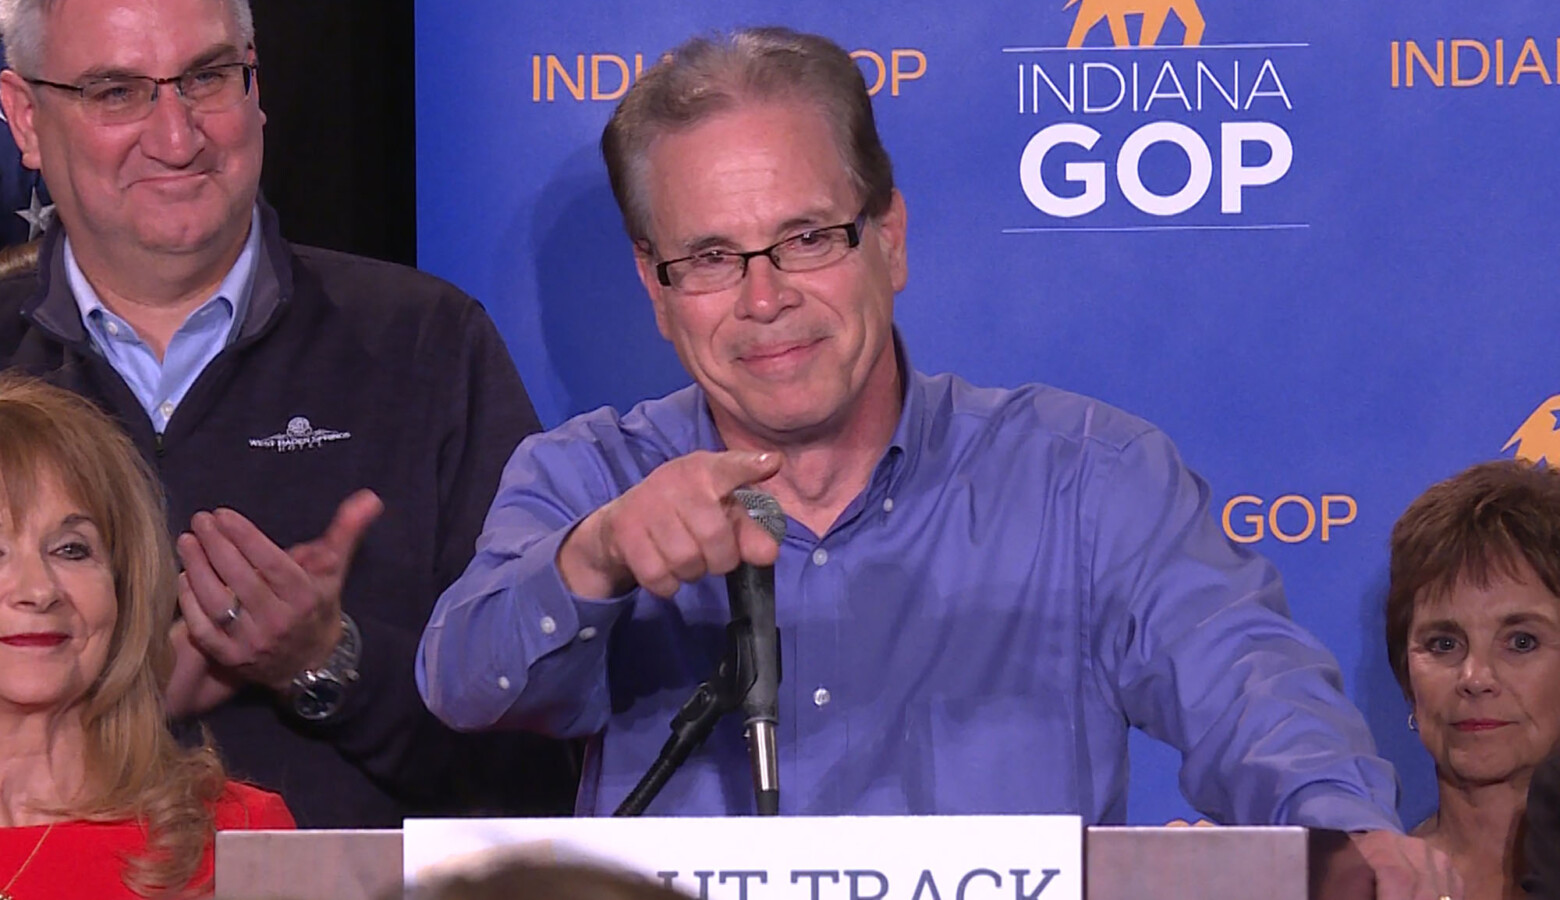 Sen. Mike Braun (R-Ind.) says he’ll be “disappointed” if the federal government provides any financial support for state and local government budgets in future COVID-19 relief packages. (FILE PHOTO: Tyler Lake/WTIU)